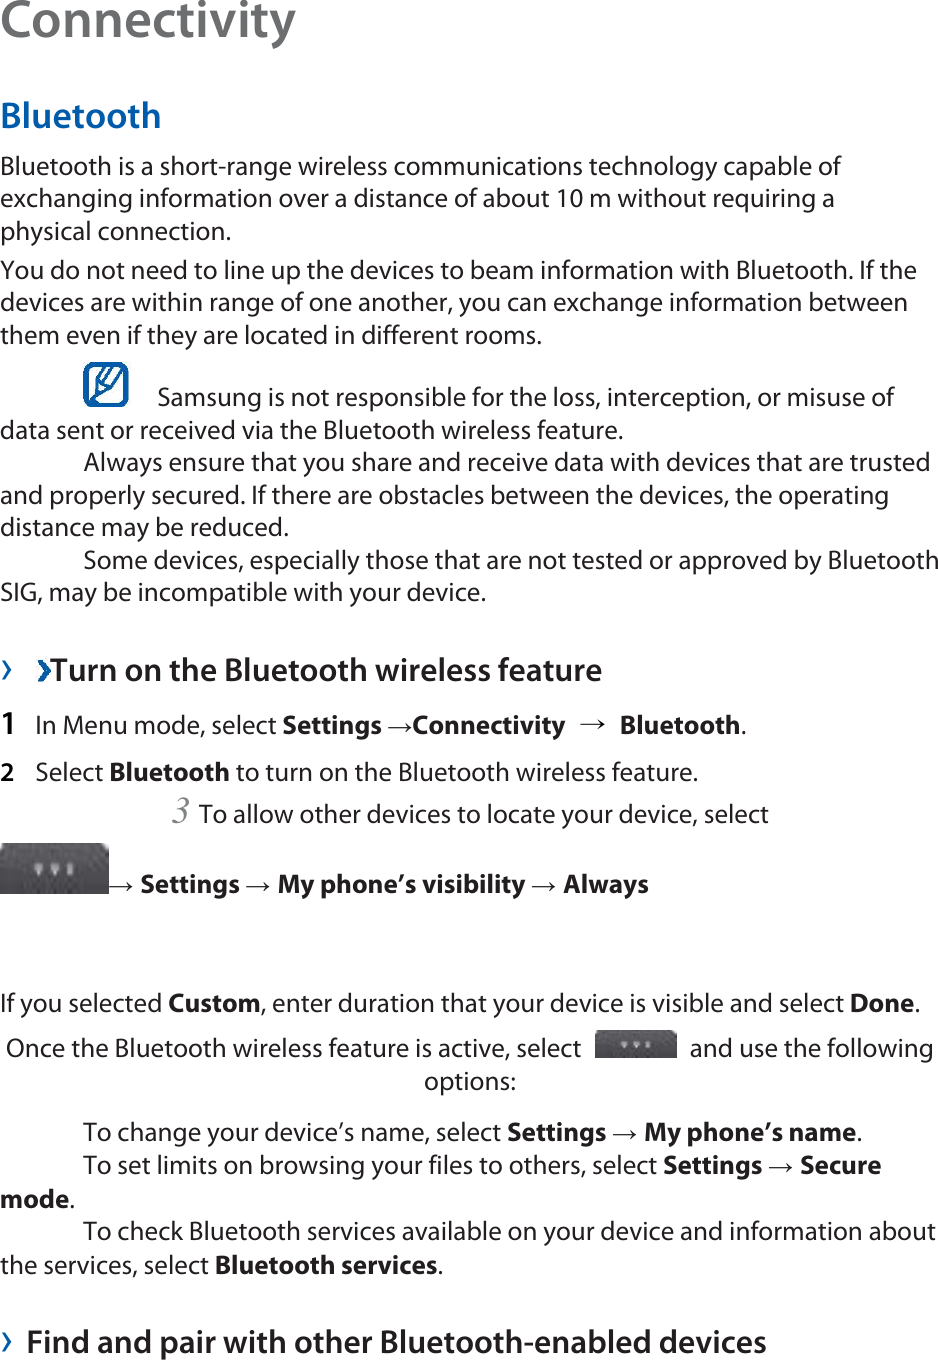 Connectivity  Bluetooth  Bluetooth is a short-range wireless communications technology capable of exchanging information over a distance of about 10 m without requiring a physical connection.   You do not need to line up the devices to beam information with Bluetooth. If the devices are within range of one another, you can exchange information between them even if they are located in different rooms.      Samsung is not responsible for the loss, interception, or misuse of data sent or received via the Bluetooth wireless feature.    Always ensure that you share and receive data with devices that are trusted and properly secured. If there are obstacles between the devices, the operating distance may be reduced.    Some devices, especially those that are not tested or approved by Bluetooth SIG, may be incompatible with your device.    ›  Turn on the Bluetooth wireless feature   1  In Menu mode, select Settings →Connectivity  → Bluetooth.  2  Select Bluetooth to turn on the Bluetooth wireless feature.   3 To allow other devices to locate your device, select   → Settings → My phone’s visibility → Always   If you selected Custom, enter duration that your device is visible and select Done.  Once the Bluetooth wireless feature is active, select    and use the following options:   To change your device’s name, select Settings → My phone’s name.   To set limits on browsing your files to others, select Settings → Secure mode.   To check Bluetooth services available on your device and information about the services, select Bluetooth services.   › Find and pair with other Bluetooth-enabled devices   